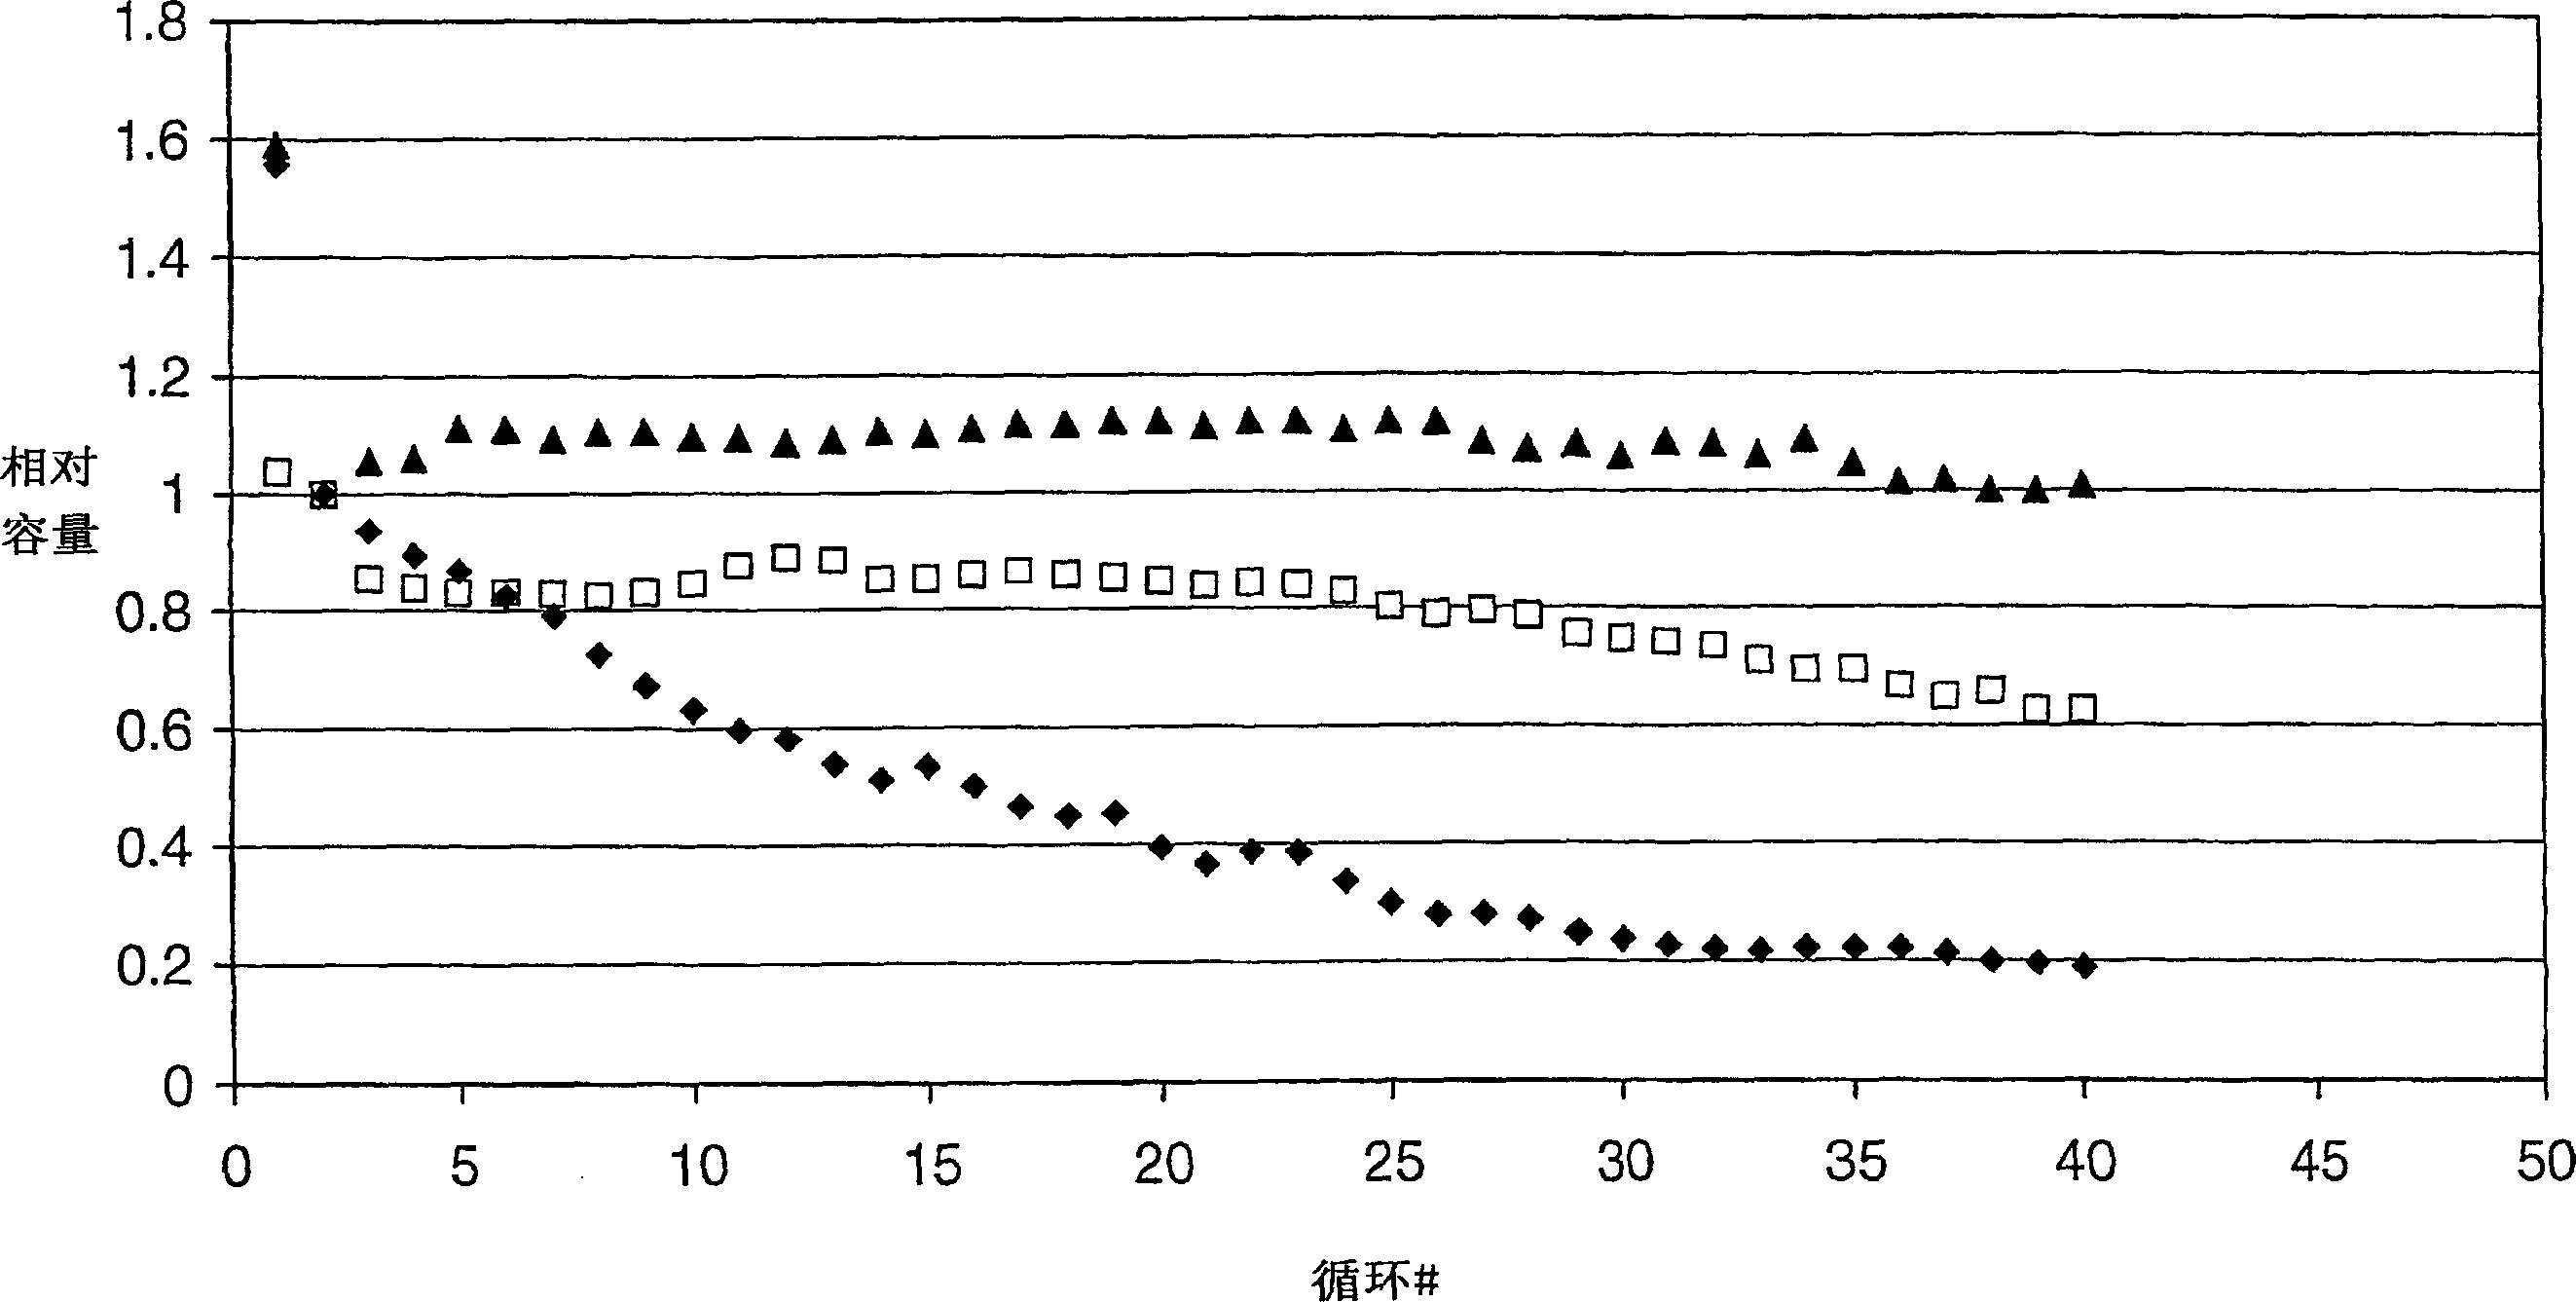 Multi-phase, silicon-containing electrode for a lithium-ion battery